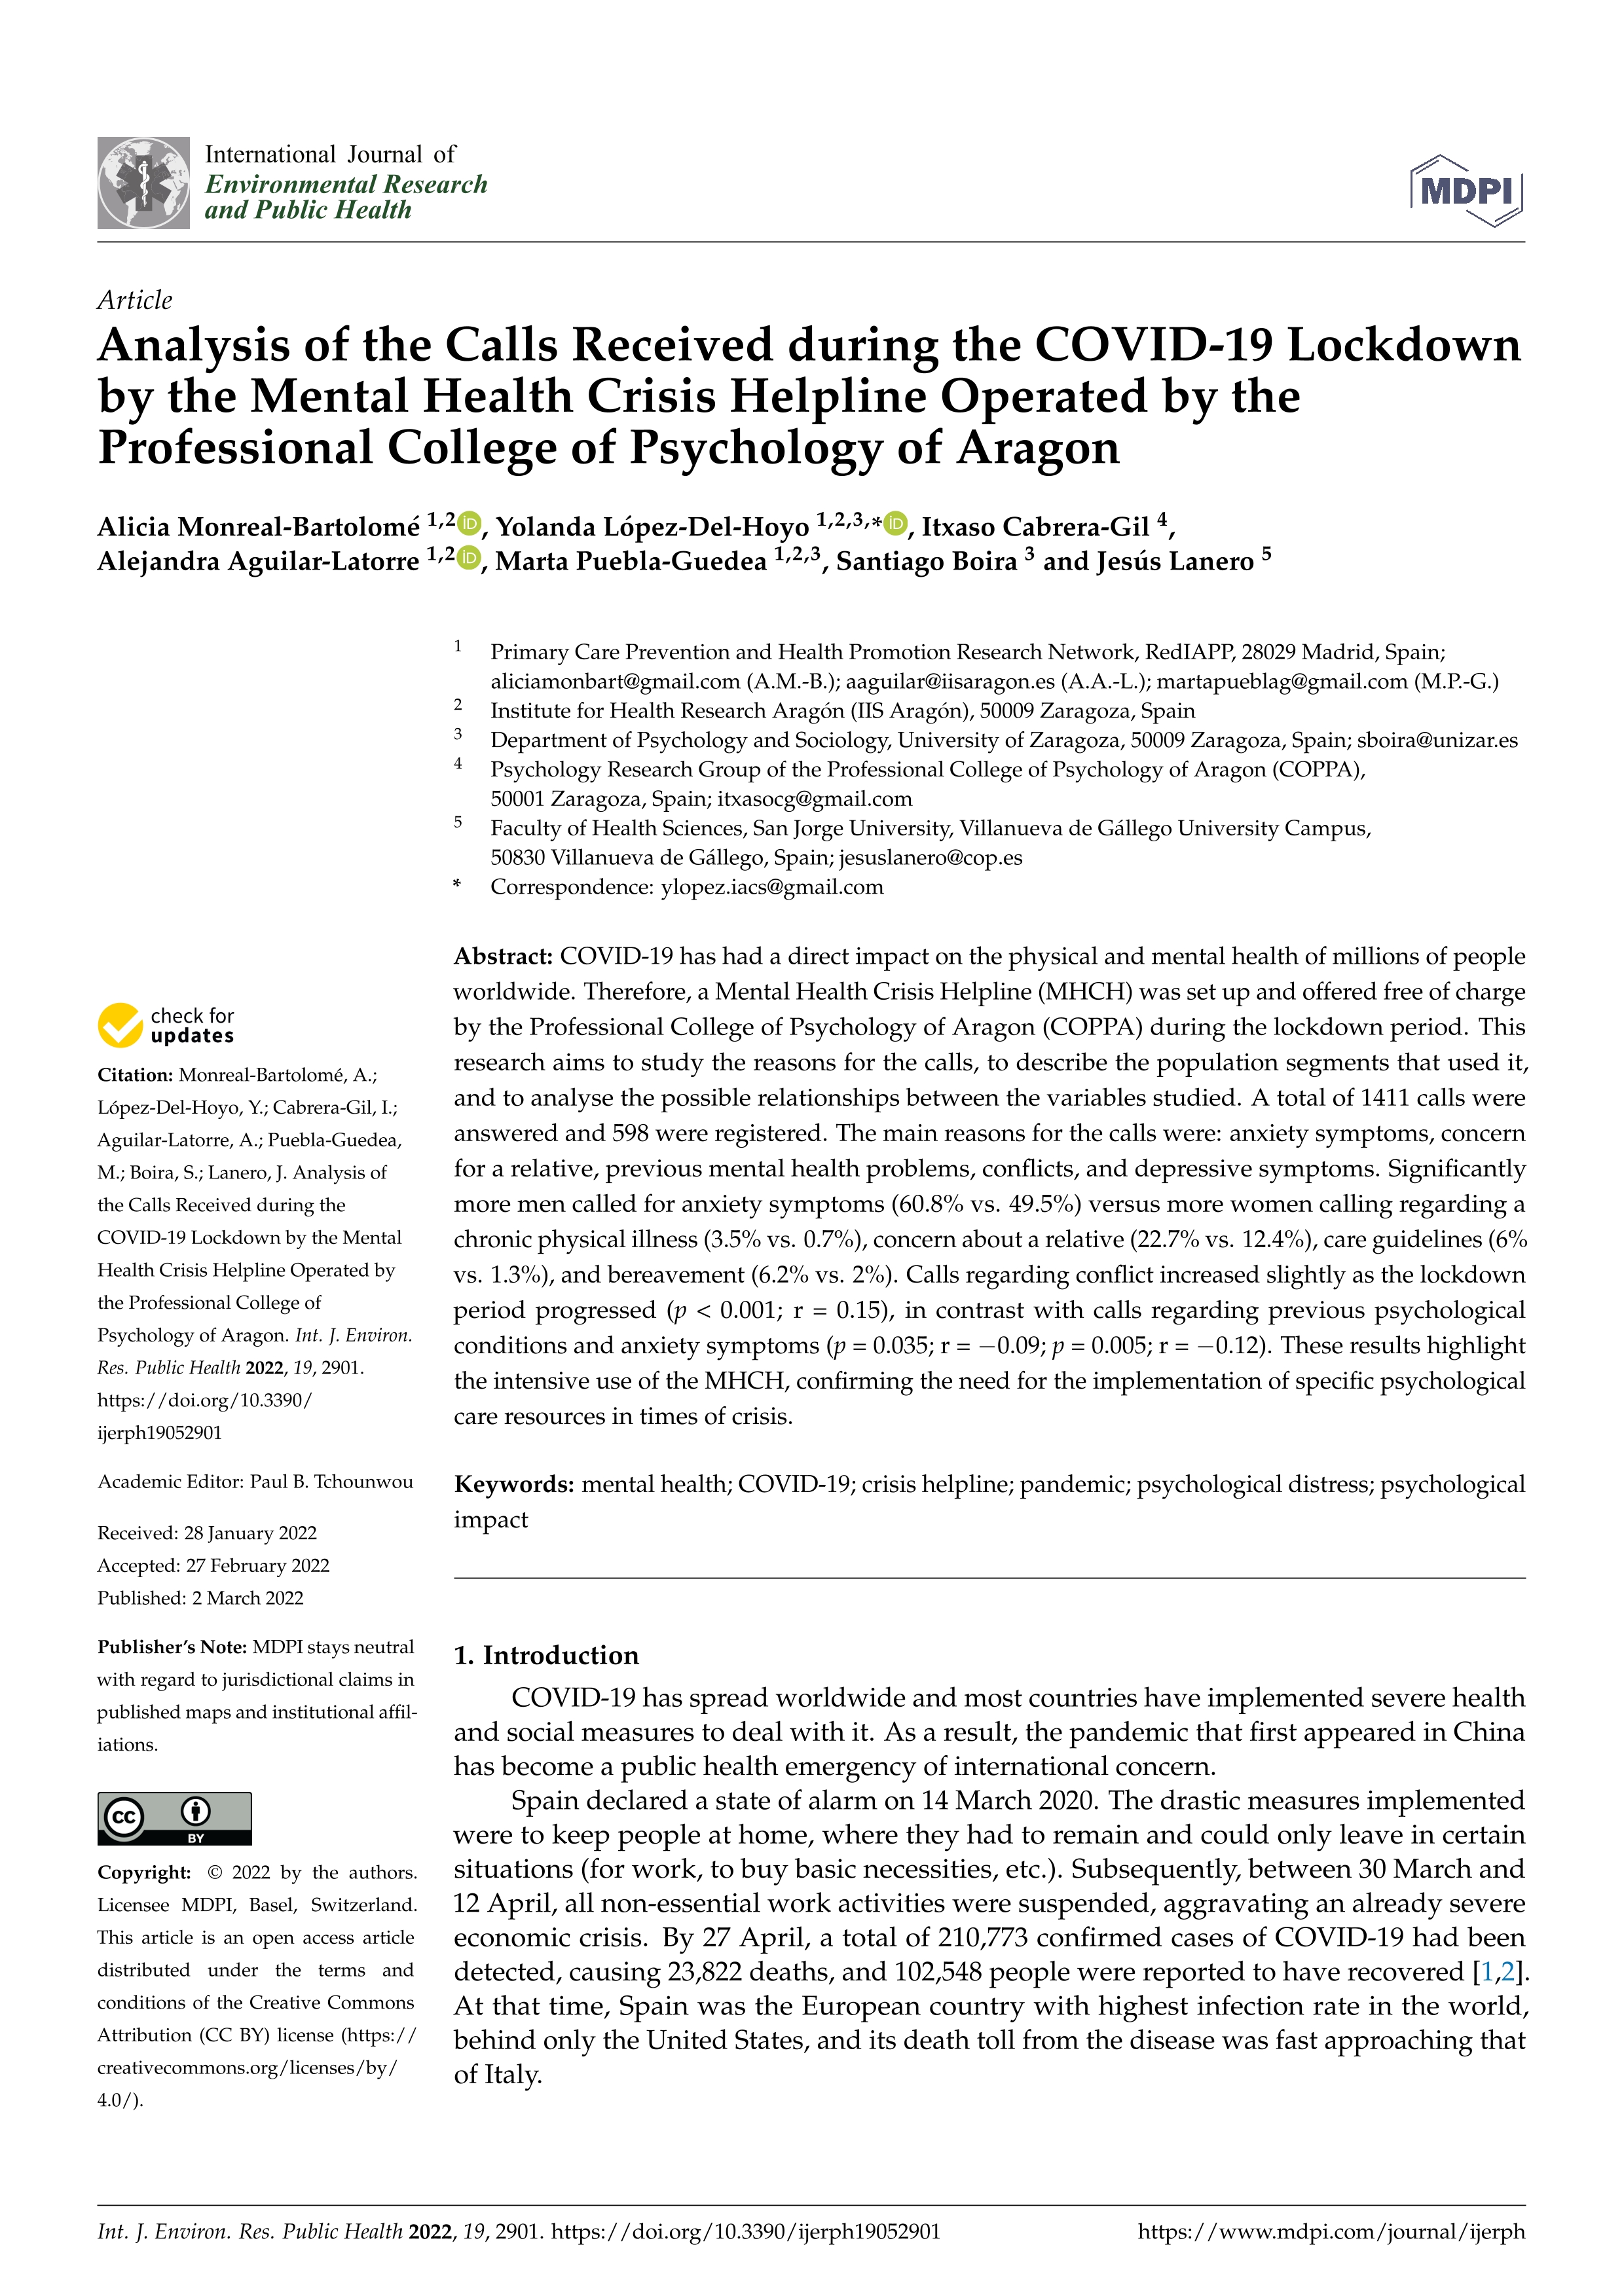 Analysis of the Calls Received during the COVID-19 Lockdown by the Mental Health Crisis Helpline Operated by the Professional College of Psychology of Aragon